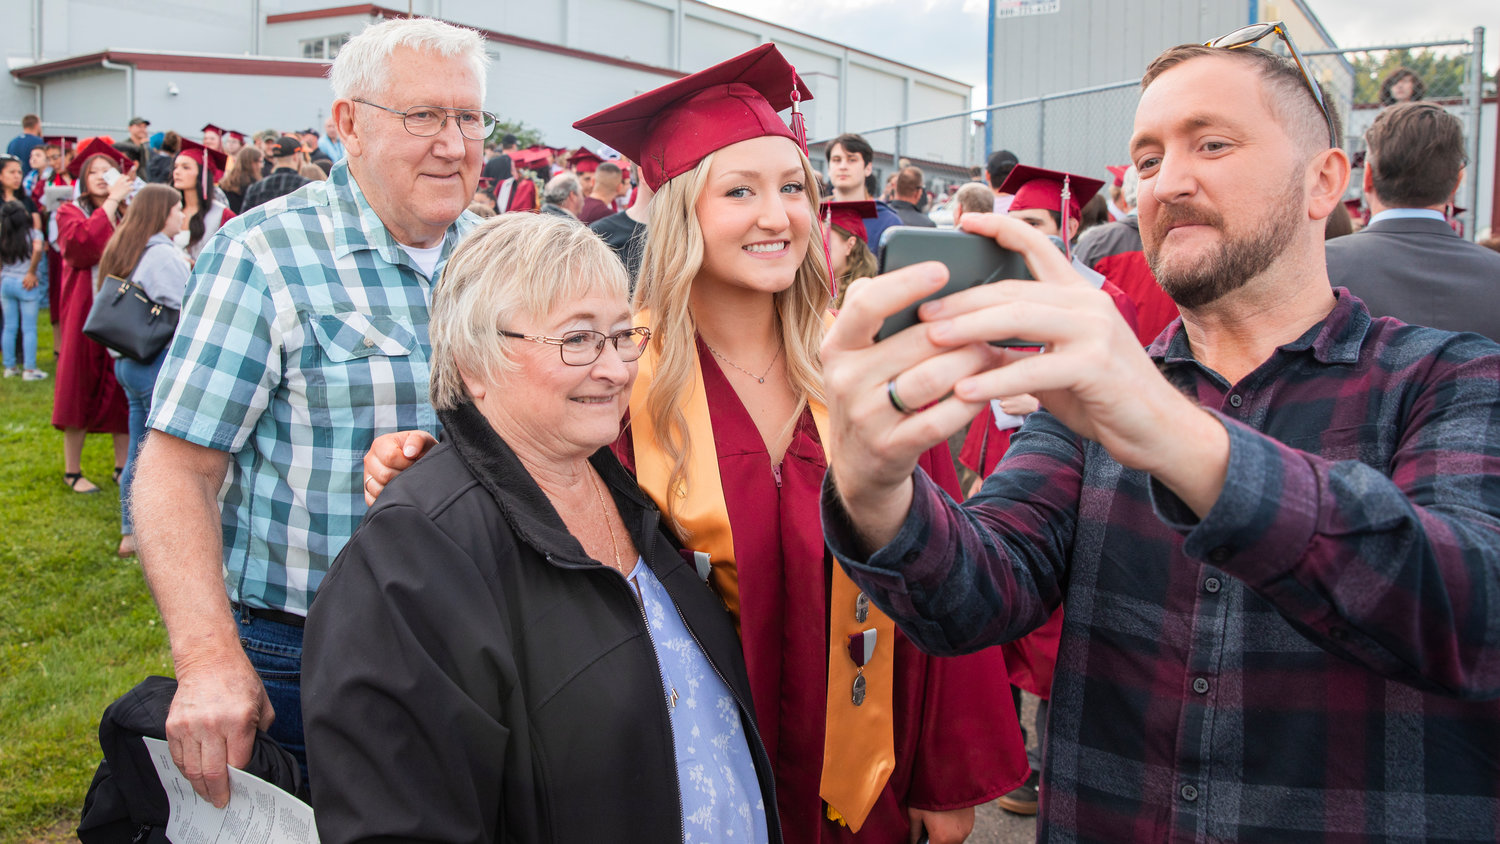 Graduates pose for photos with family outside W.F. West High School in Chehalis.